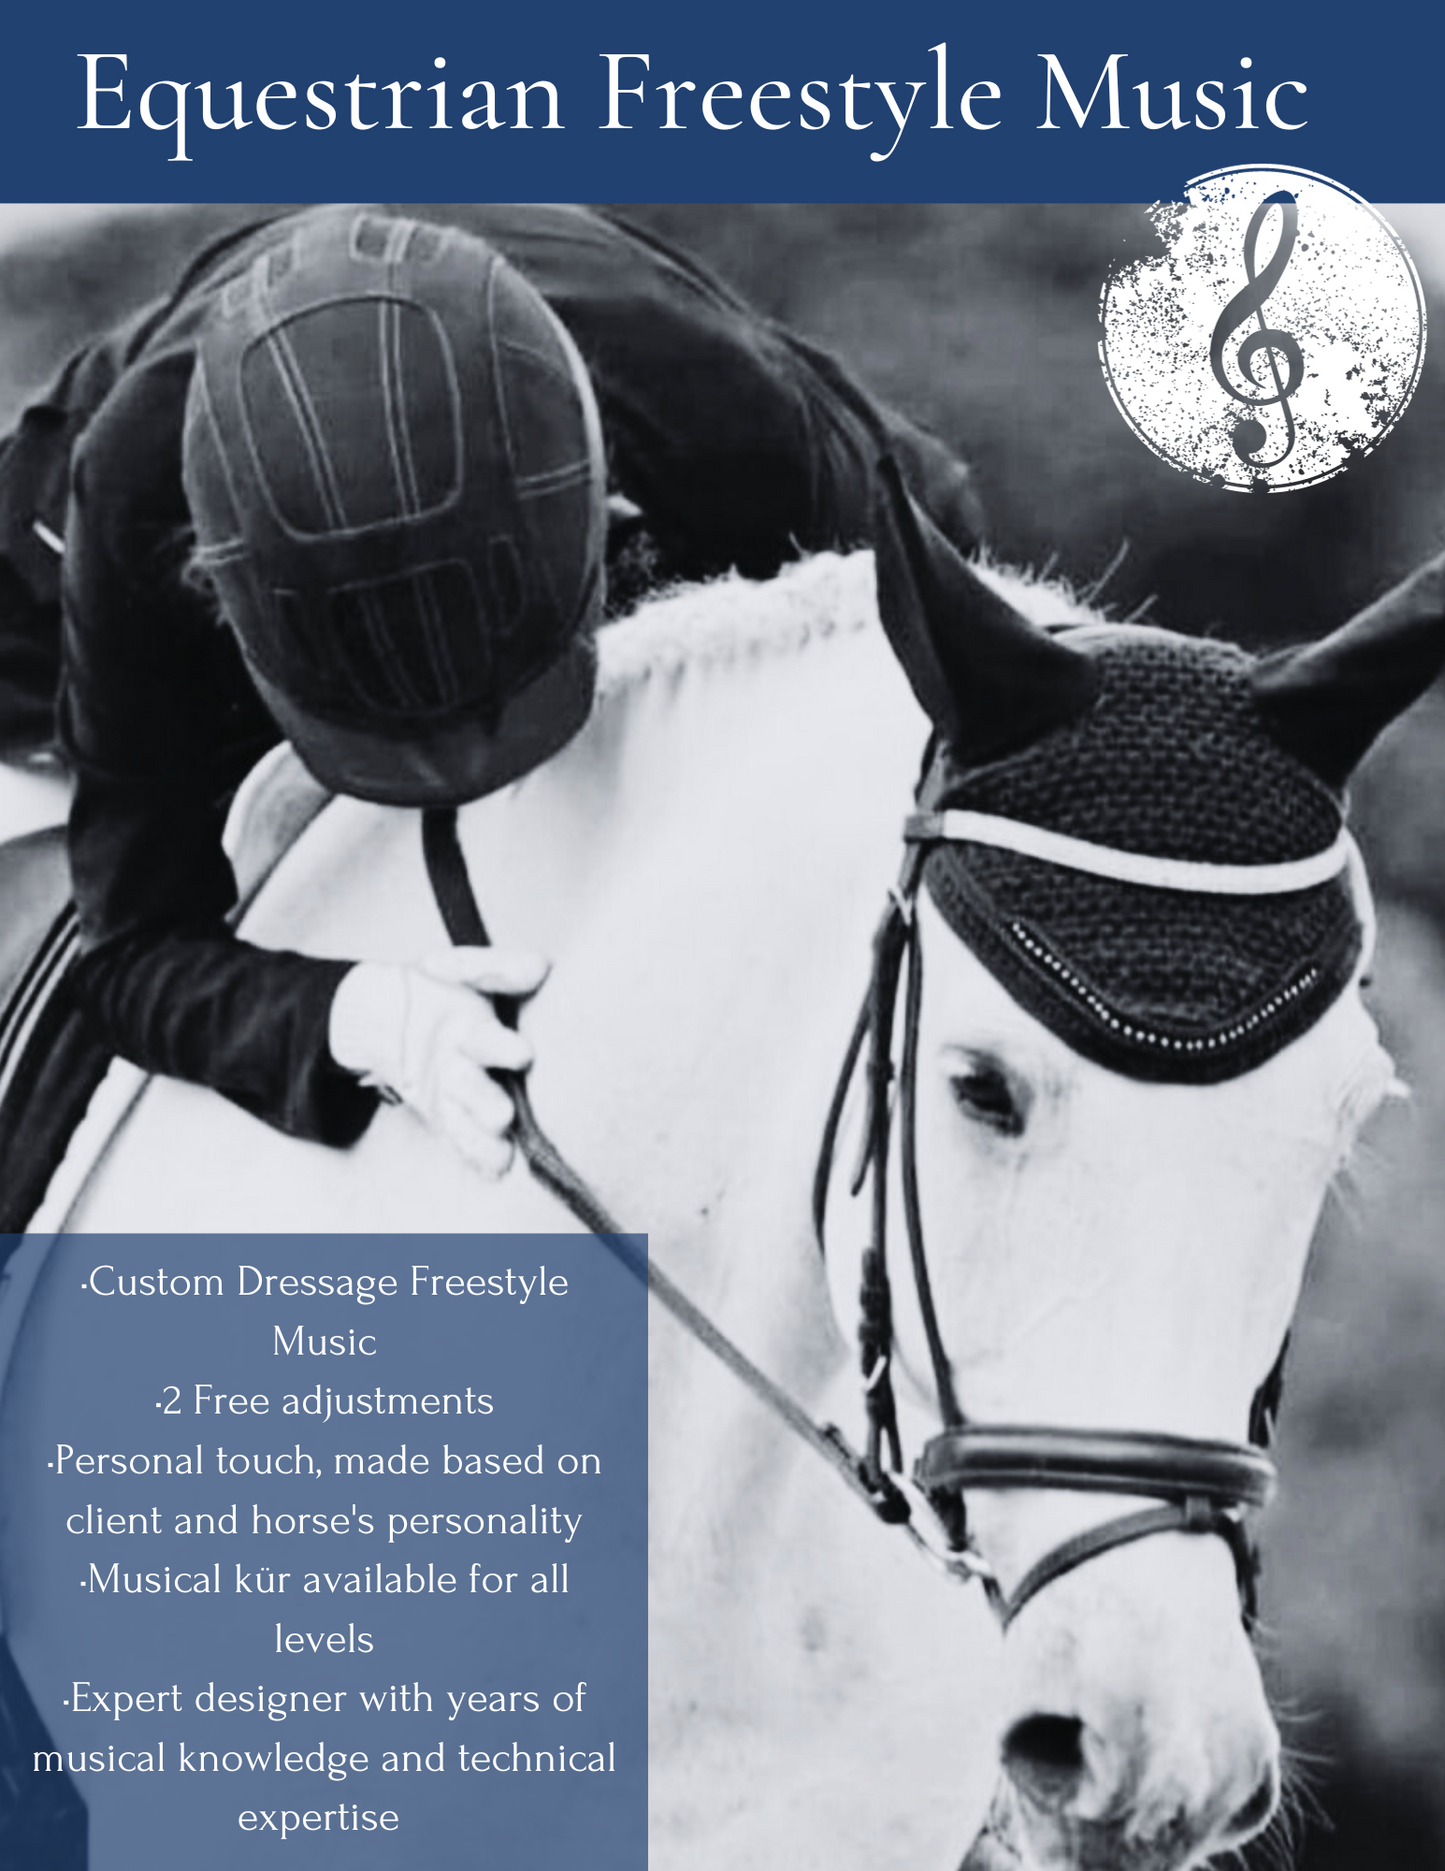 Equestrian Freestyle Music